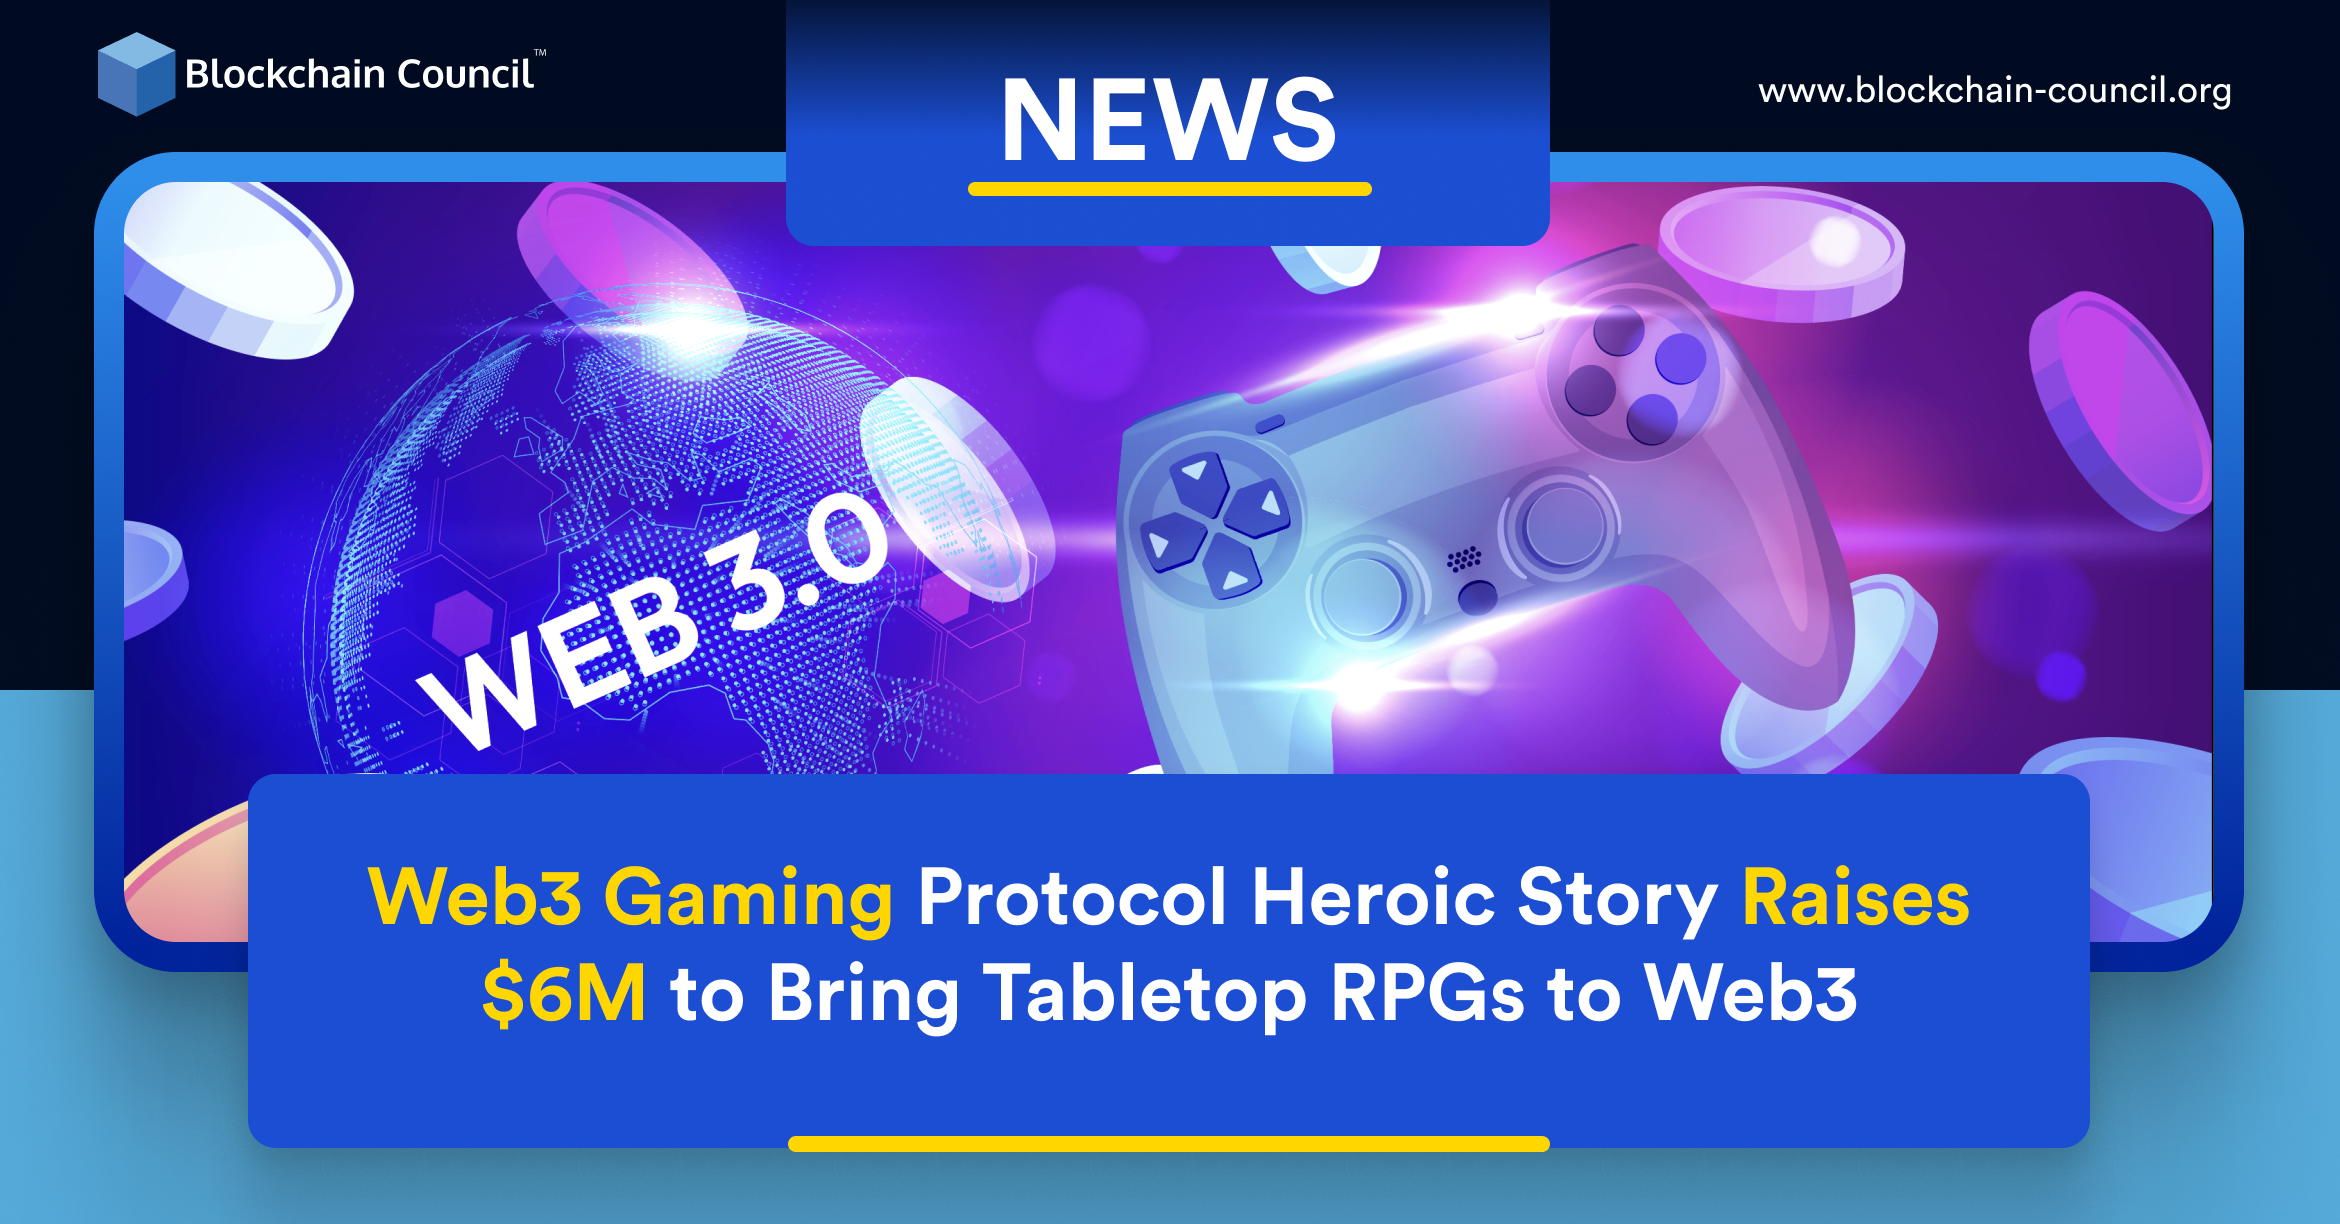 Heroic Story, a web3 gaming protocol, raised 6 million dollars in funding led by Upfront Ventures. Polygon Technology and Multicoin Capital also participated in this fundraising round.